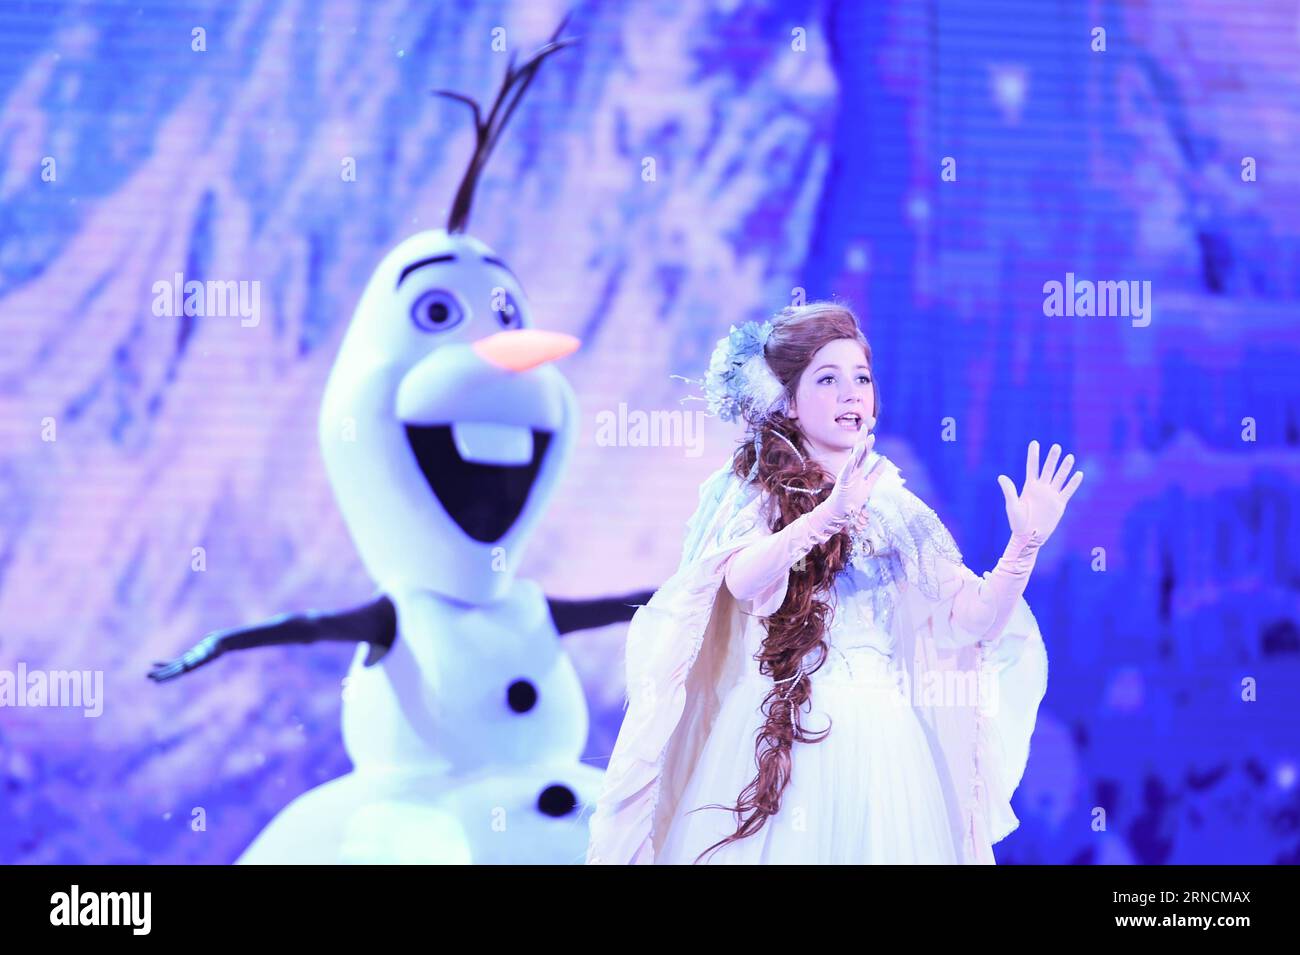 6. Internationales Filmfestival in Peking - Eröffnung (160416) -- BEIJING, April 16, 2016 -- Young singer Lexi Walker from the United States sings Let It Go , theme song of movie Frozen at the opening ceremony of the 6th Beijing International Film Festival (BJIFF) in Beijing, capital of China, April 16, 2016. The BJIFF kicked off Saturday and will last until April 23. ) (wjq) CHINA-BEIJING-FILM FESTIVAL-OPENING (CN) YaoxJianfeng PUBLICATIONxNOTxINxCHN   6 International Film Festival in Beijing Opening 160416 Beijing April 16 2016 Young Singer Lexi Walker from The United States Sings Let IT Go Stock Photo